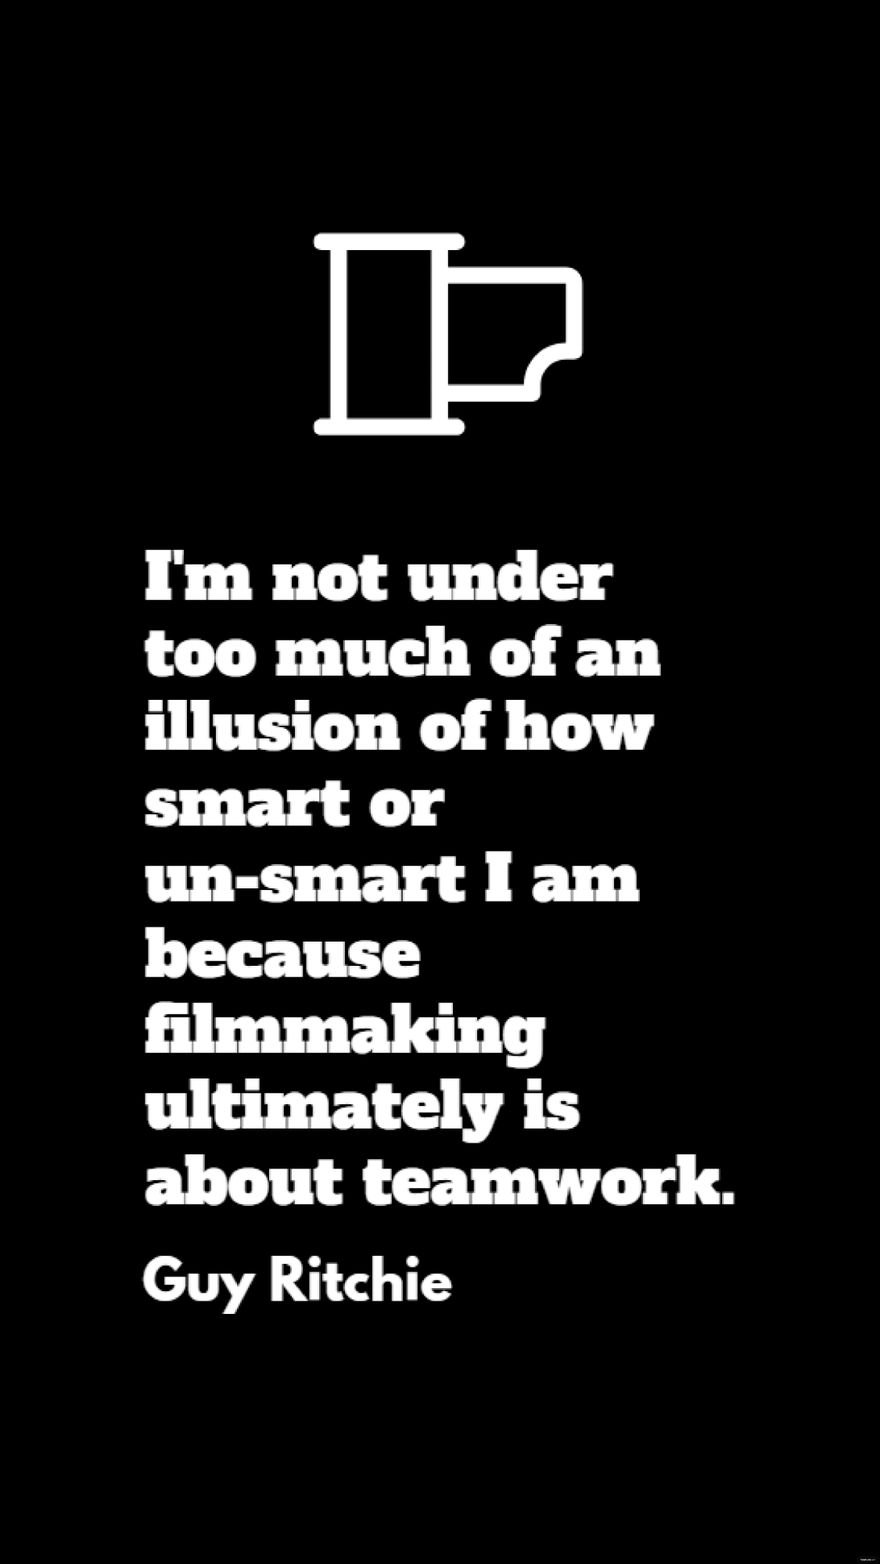 Free Guy Ritchie - I'm not under too much of an illusion of how smart or un-smart I am because filmmaking ultimately is about teamwork. in JPG